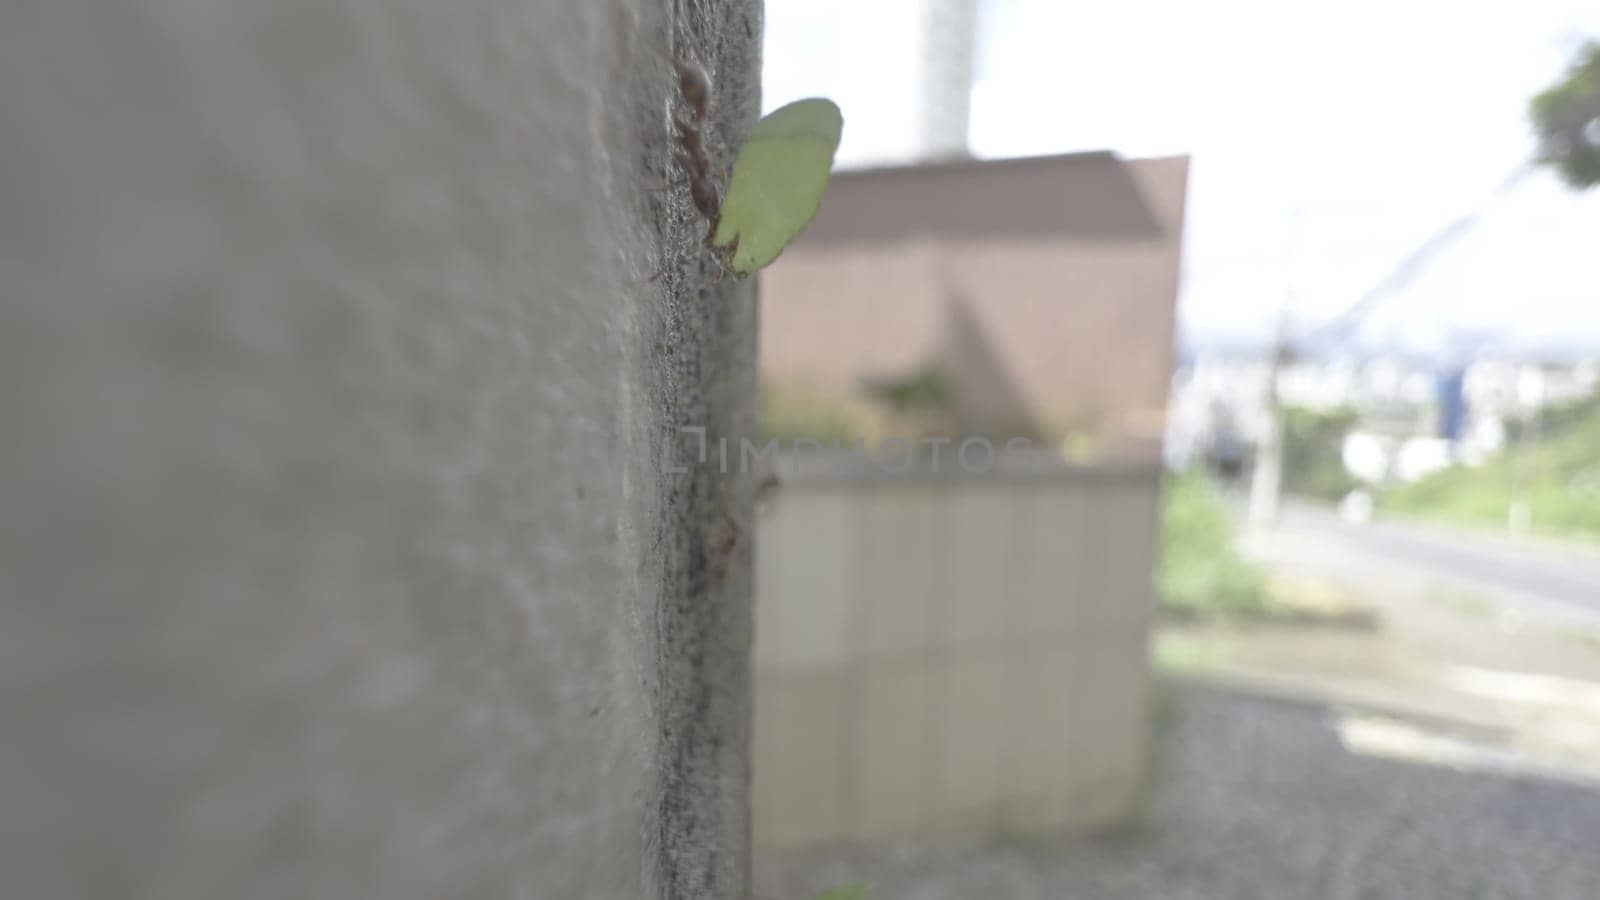 Close-up video shows ants carrying leaves on a city wall.